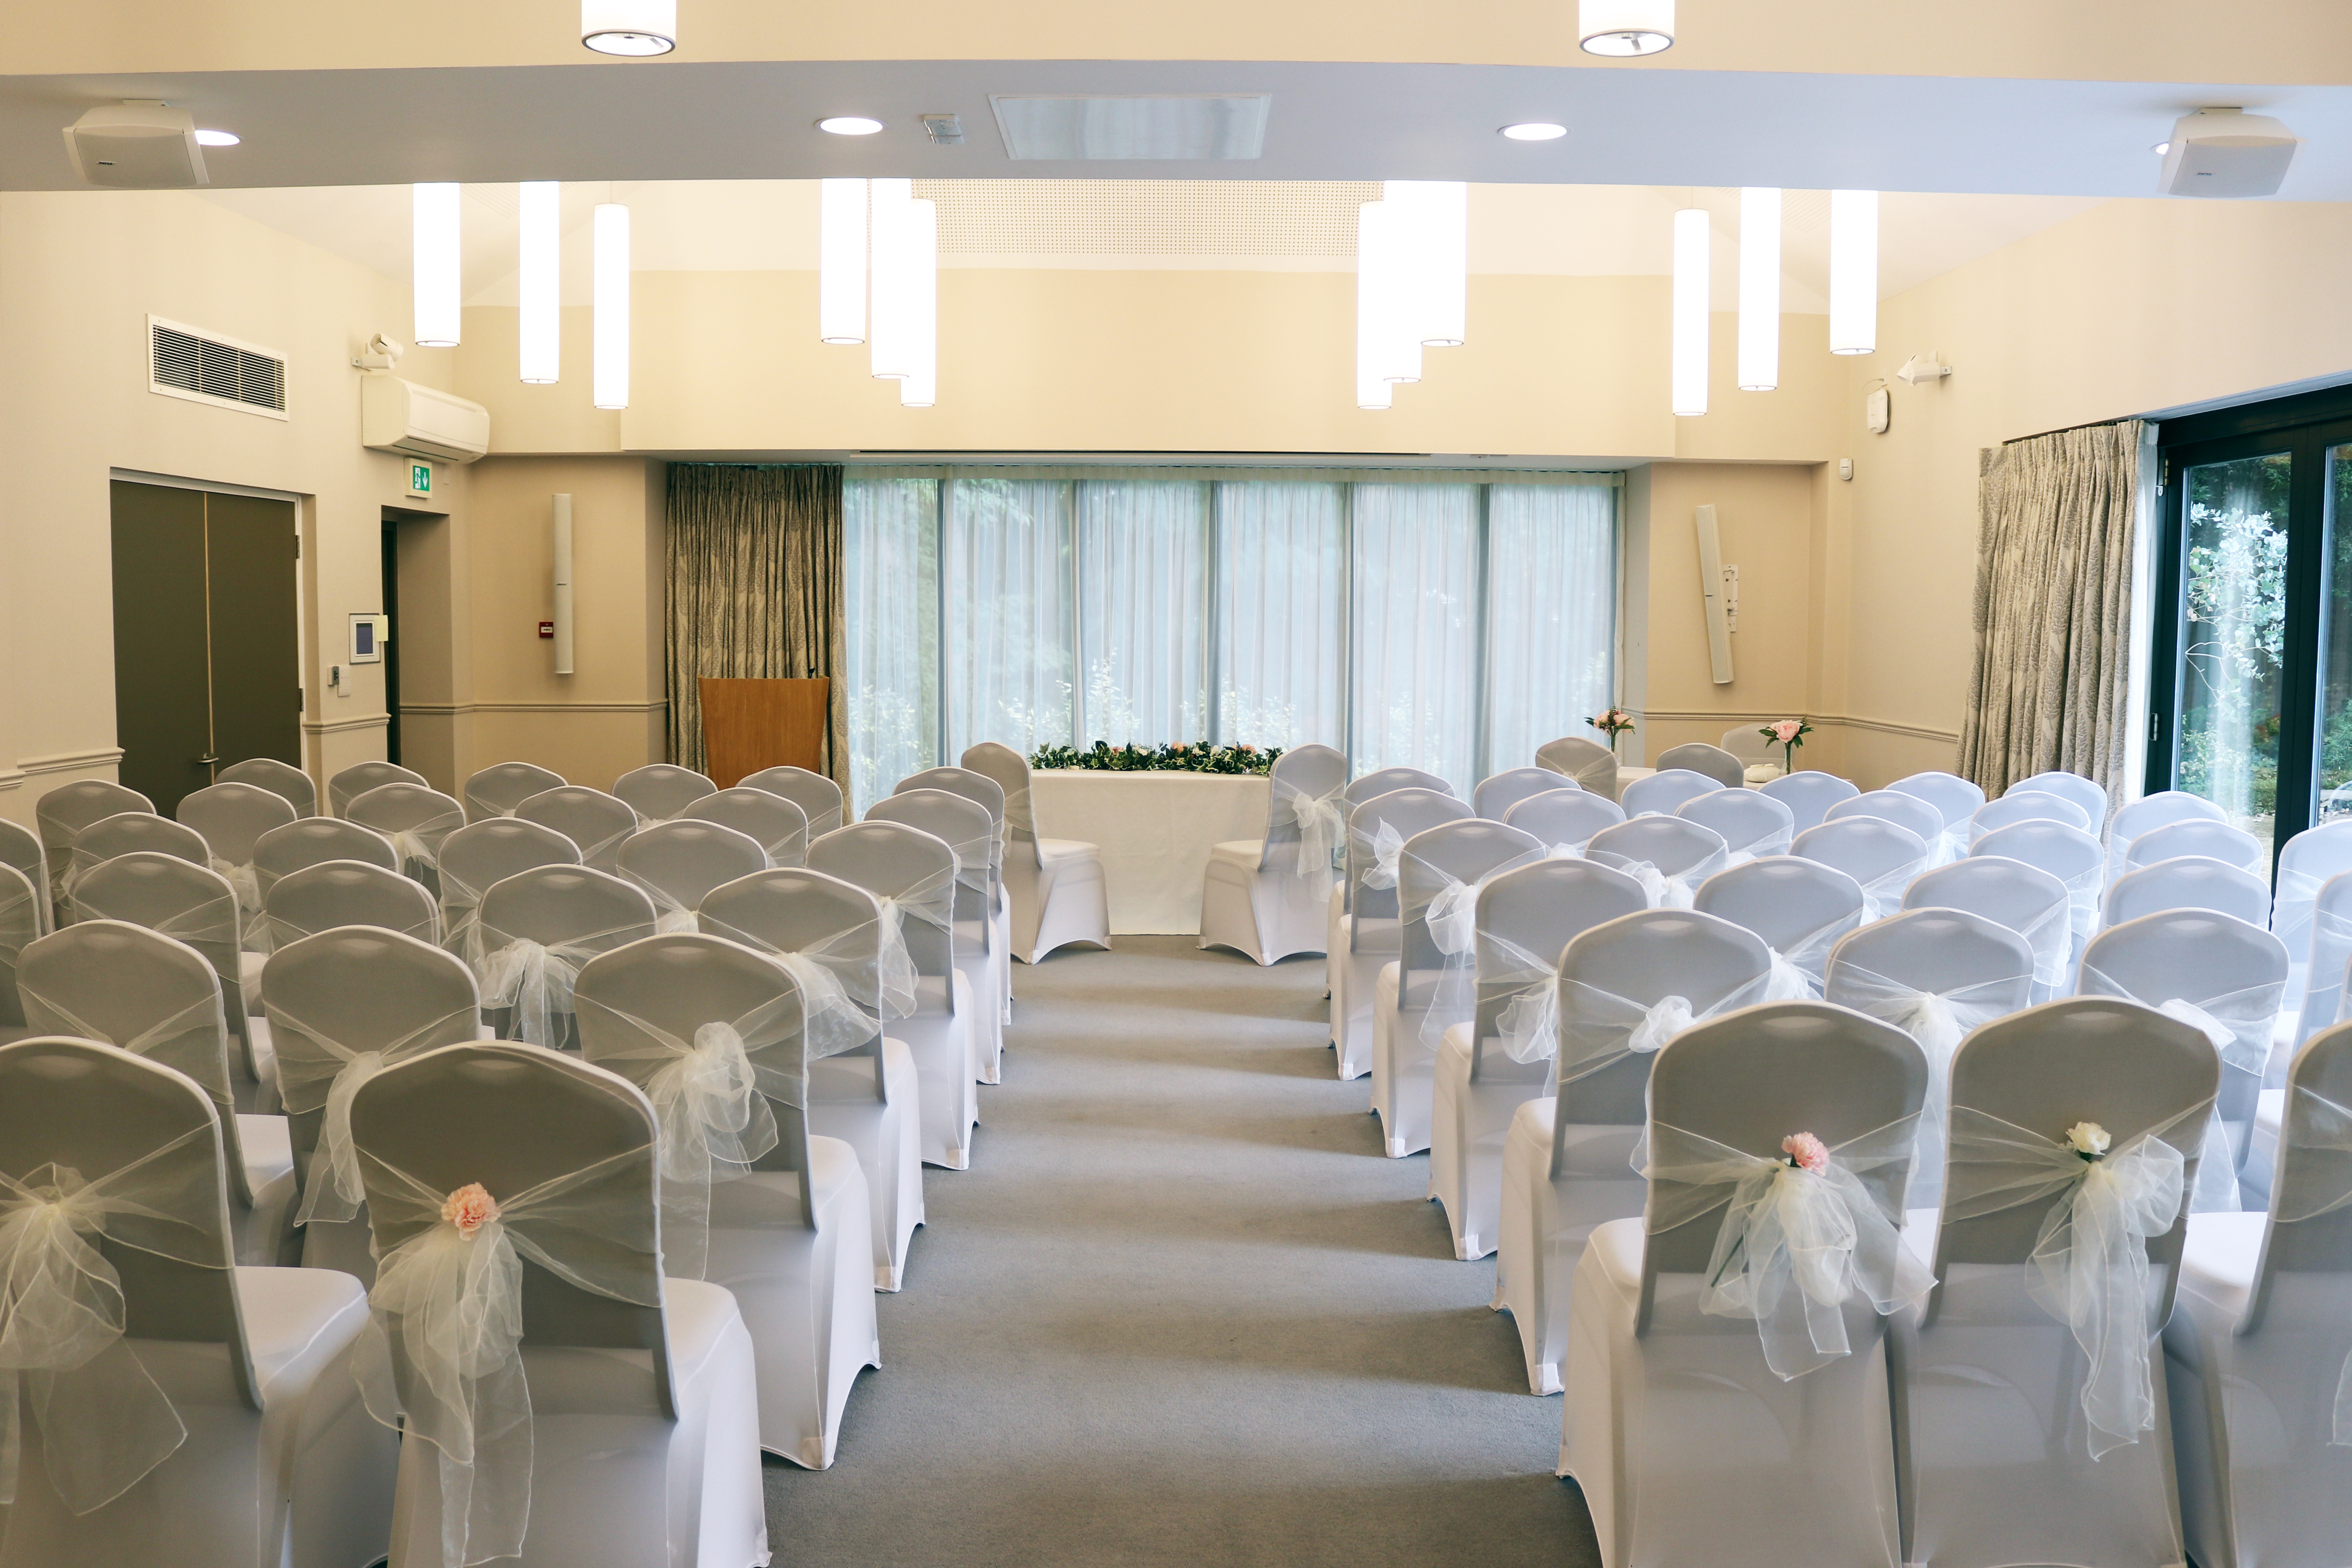 Ceremony room with rows of white chairs